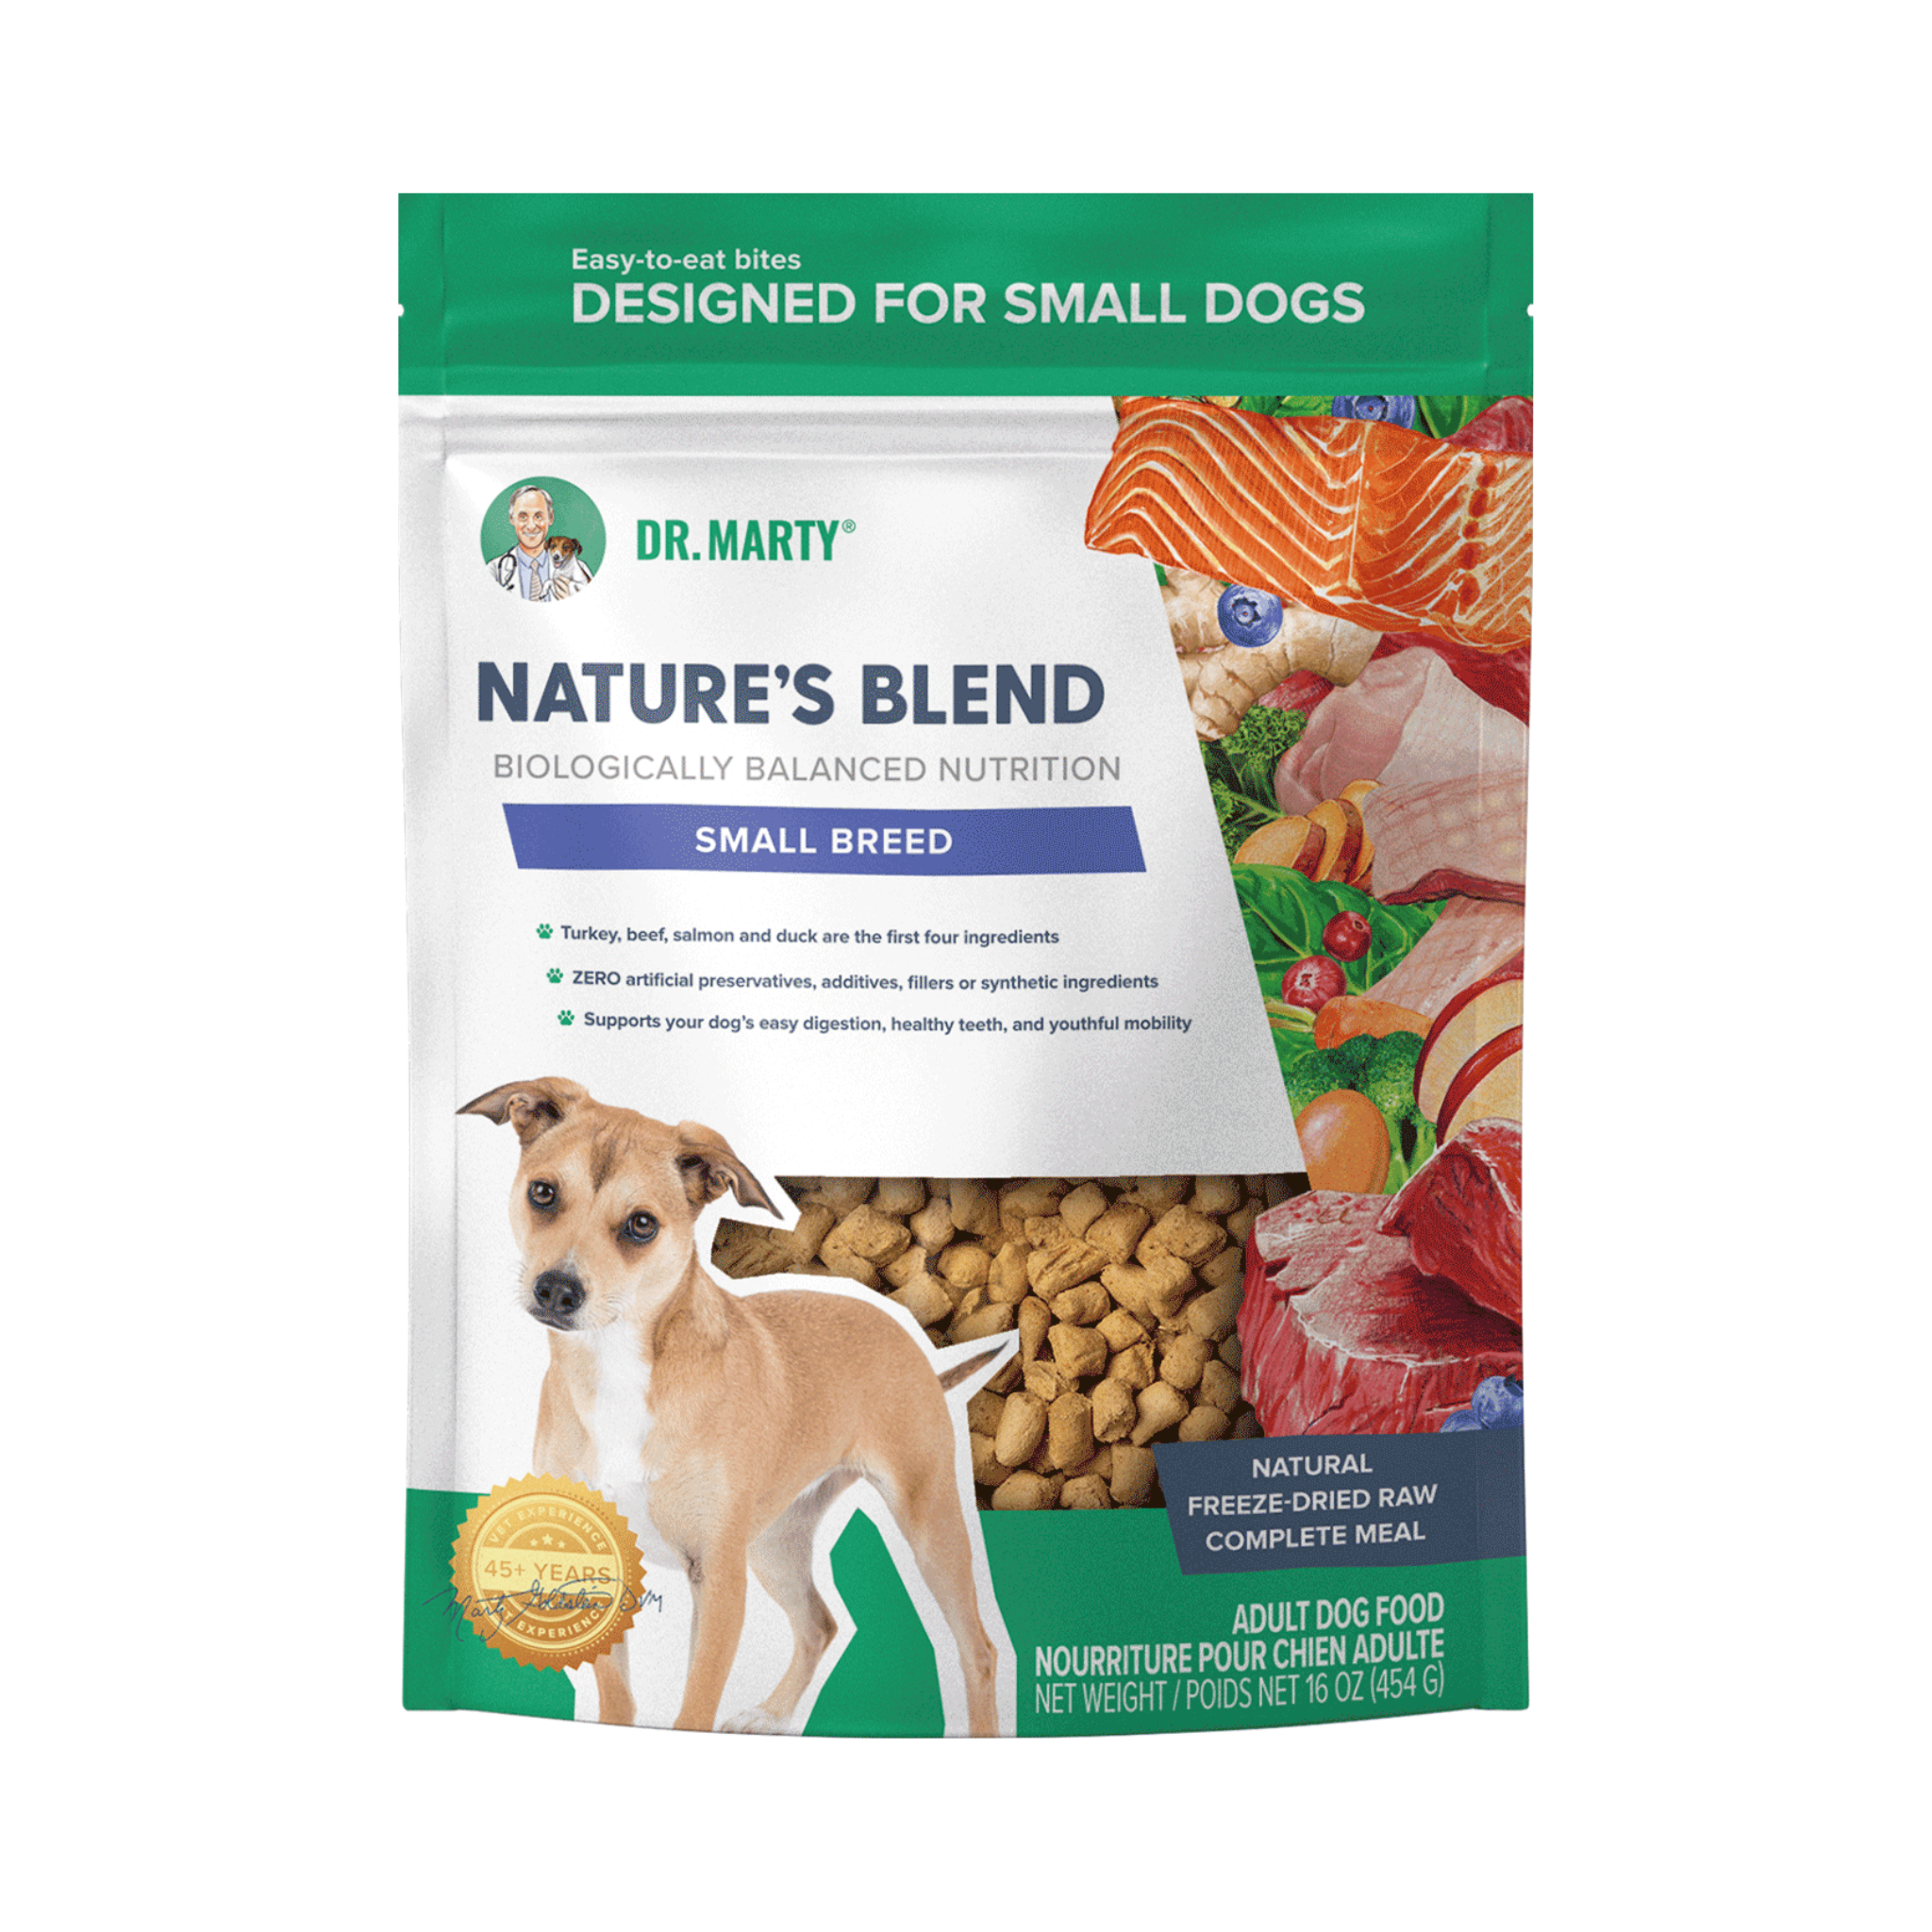 Dr. Marty's Natures Blend Small Breed Freeze Dried Dog Food